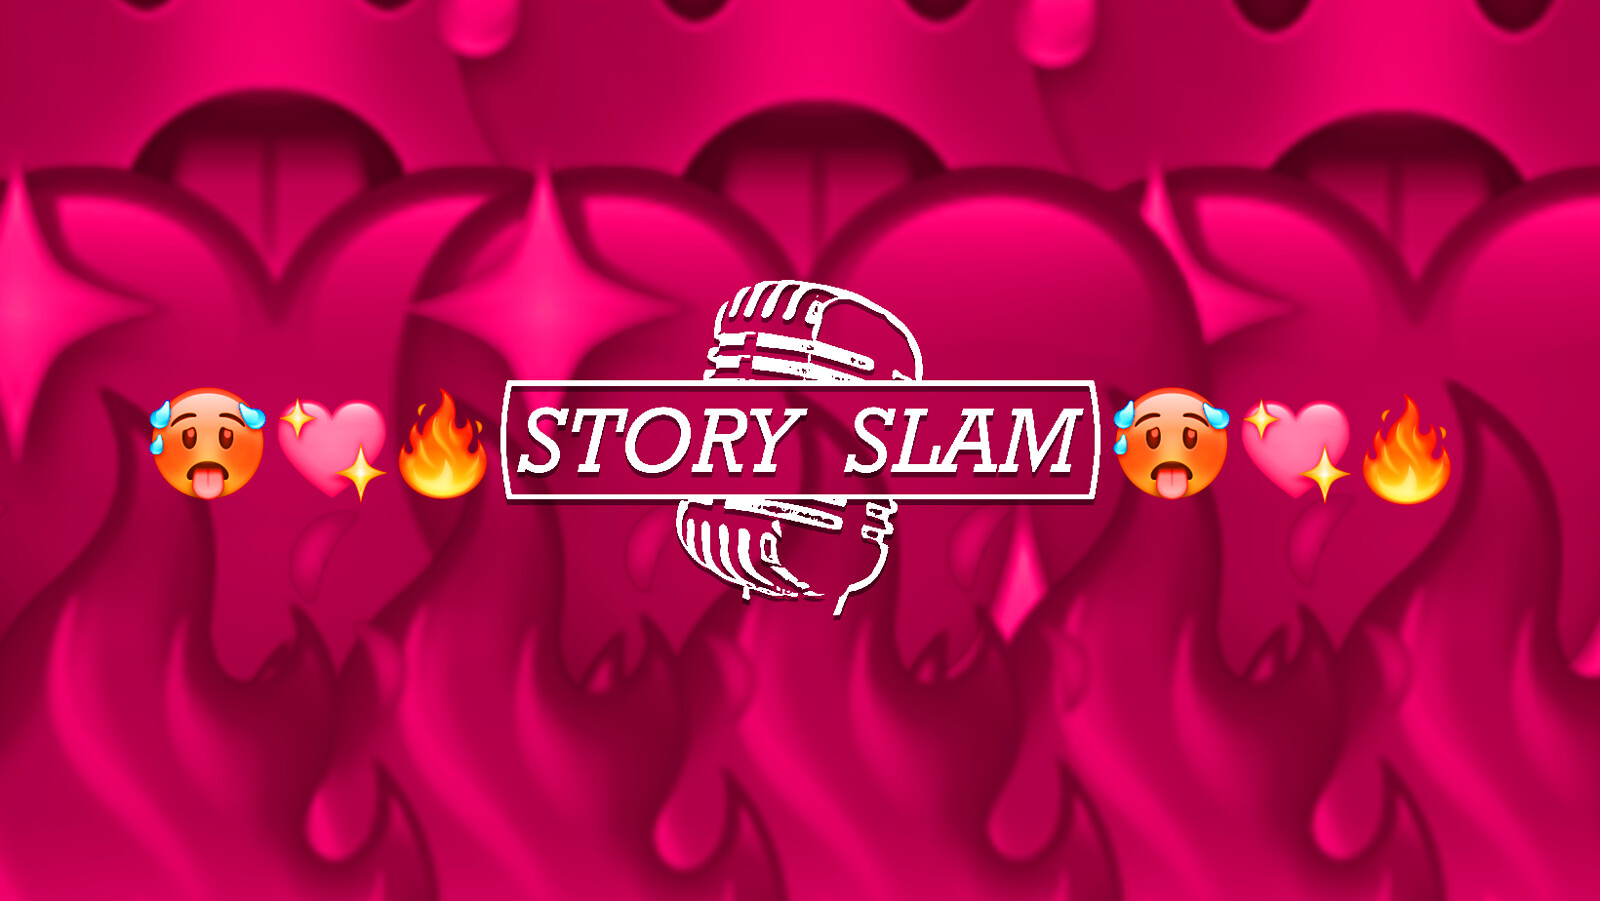 Story Slam: After Dark at The Wardrobe Theatre